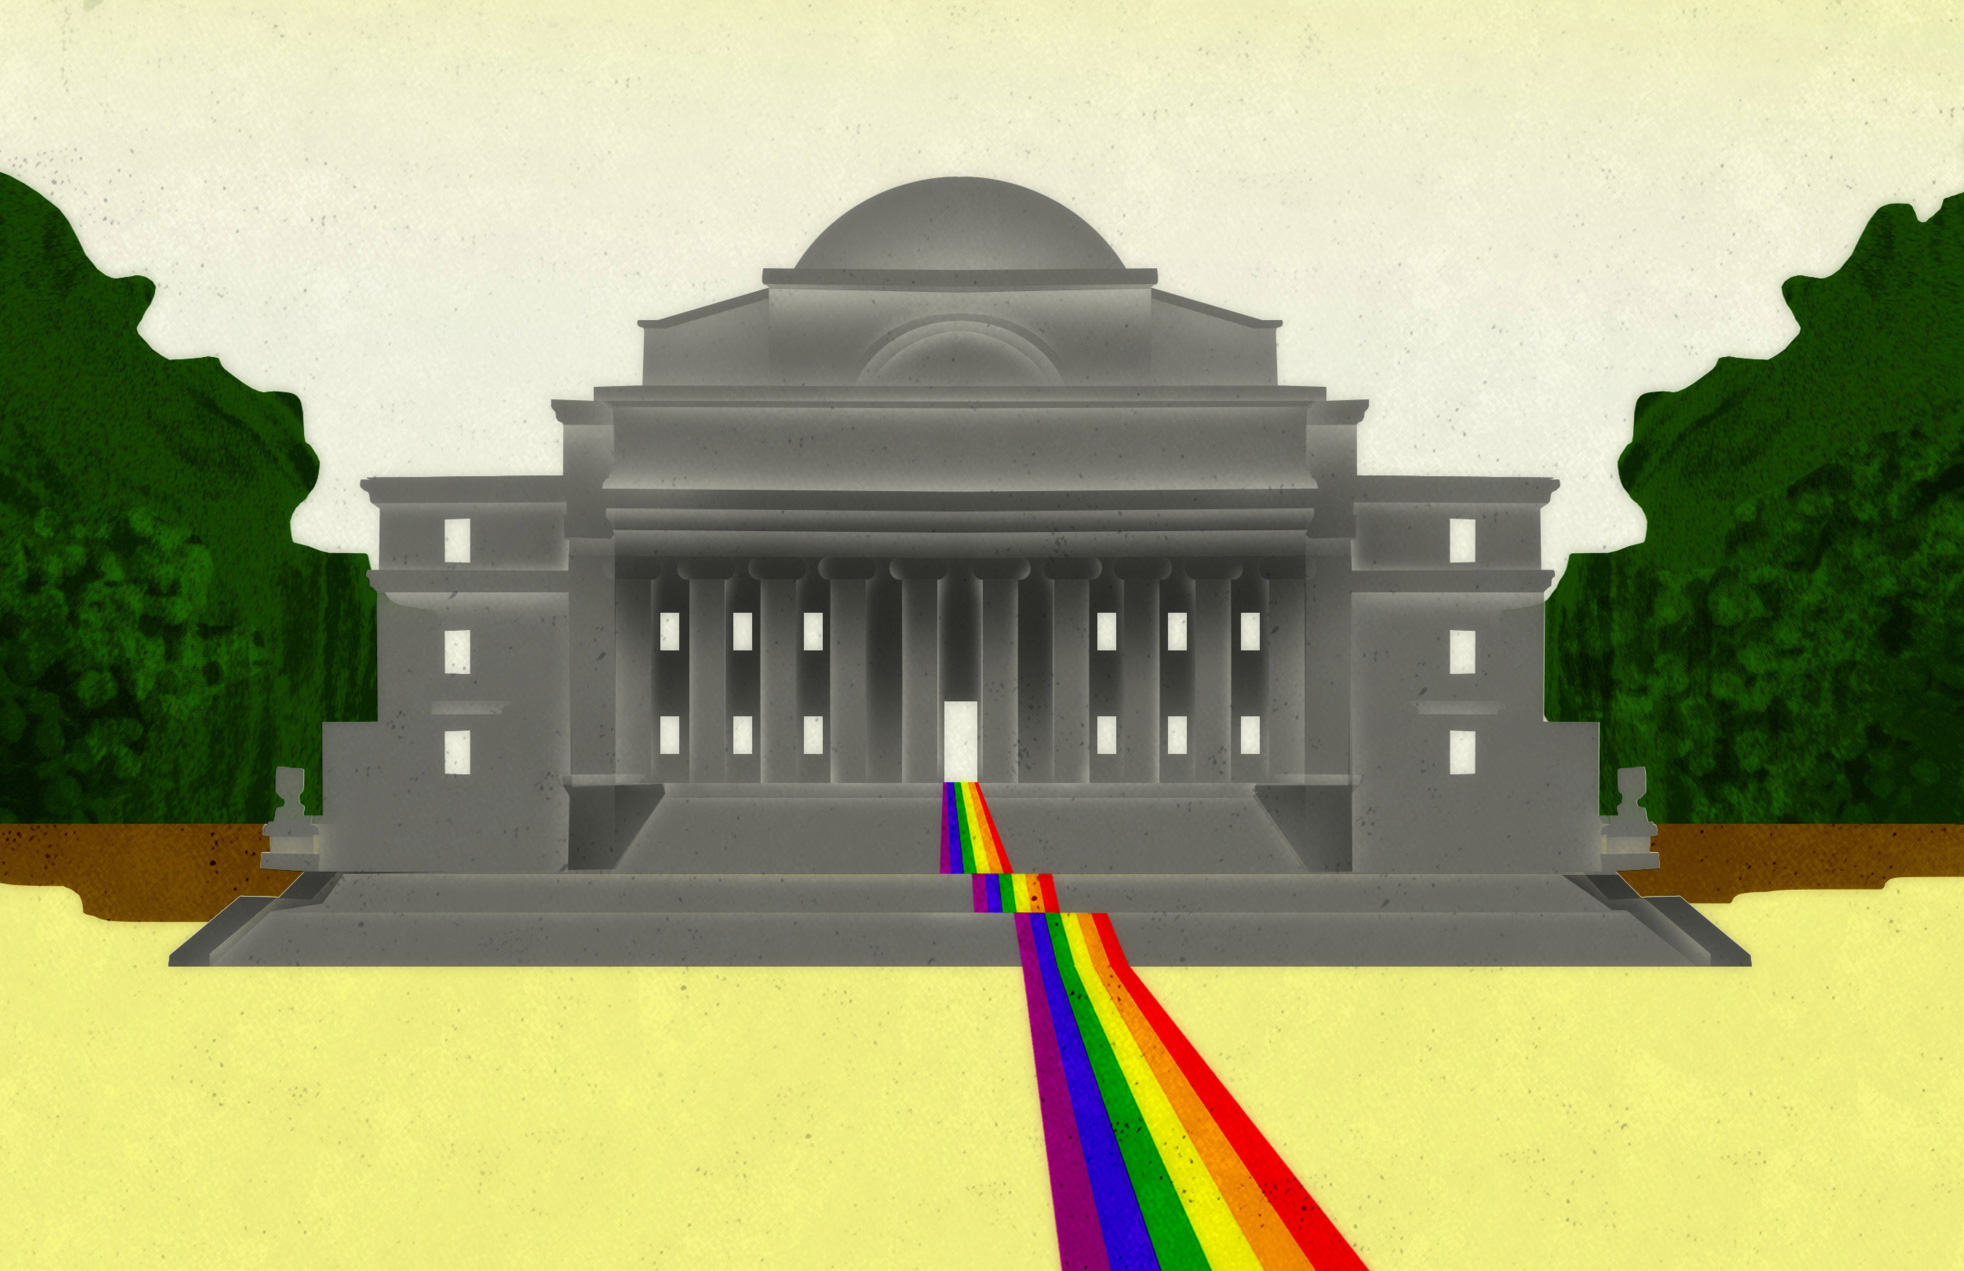 Illustration by Brian Stauffer of Columbia's Low Library with a rainbow flag coming out the doorway